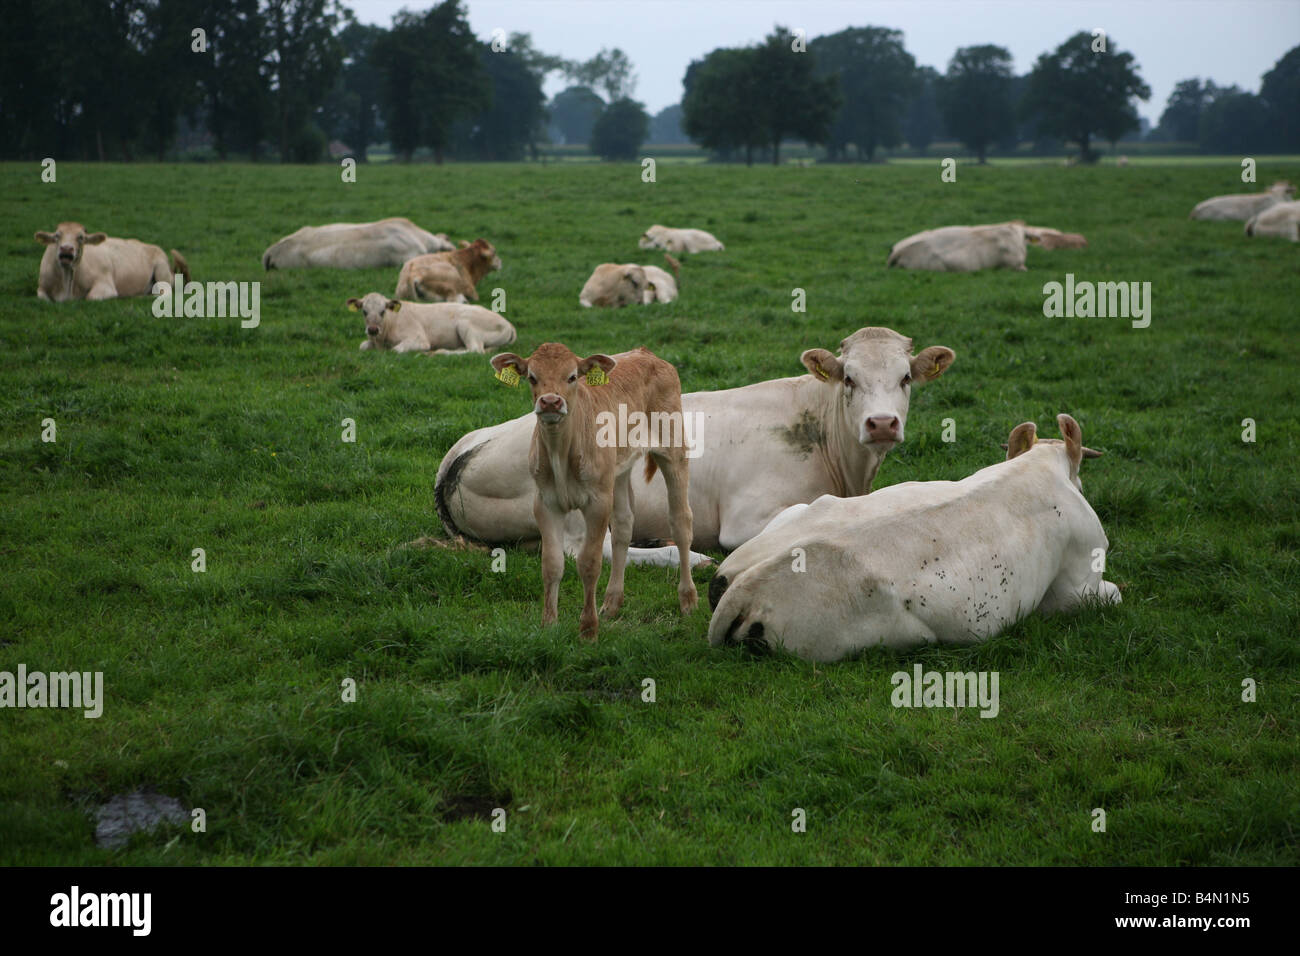 cattle being kept for meat production Stock Photo